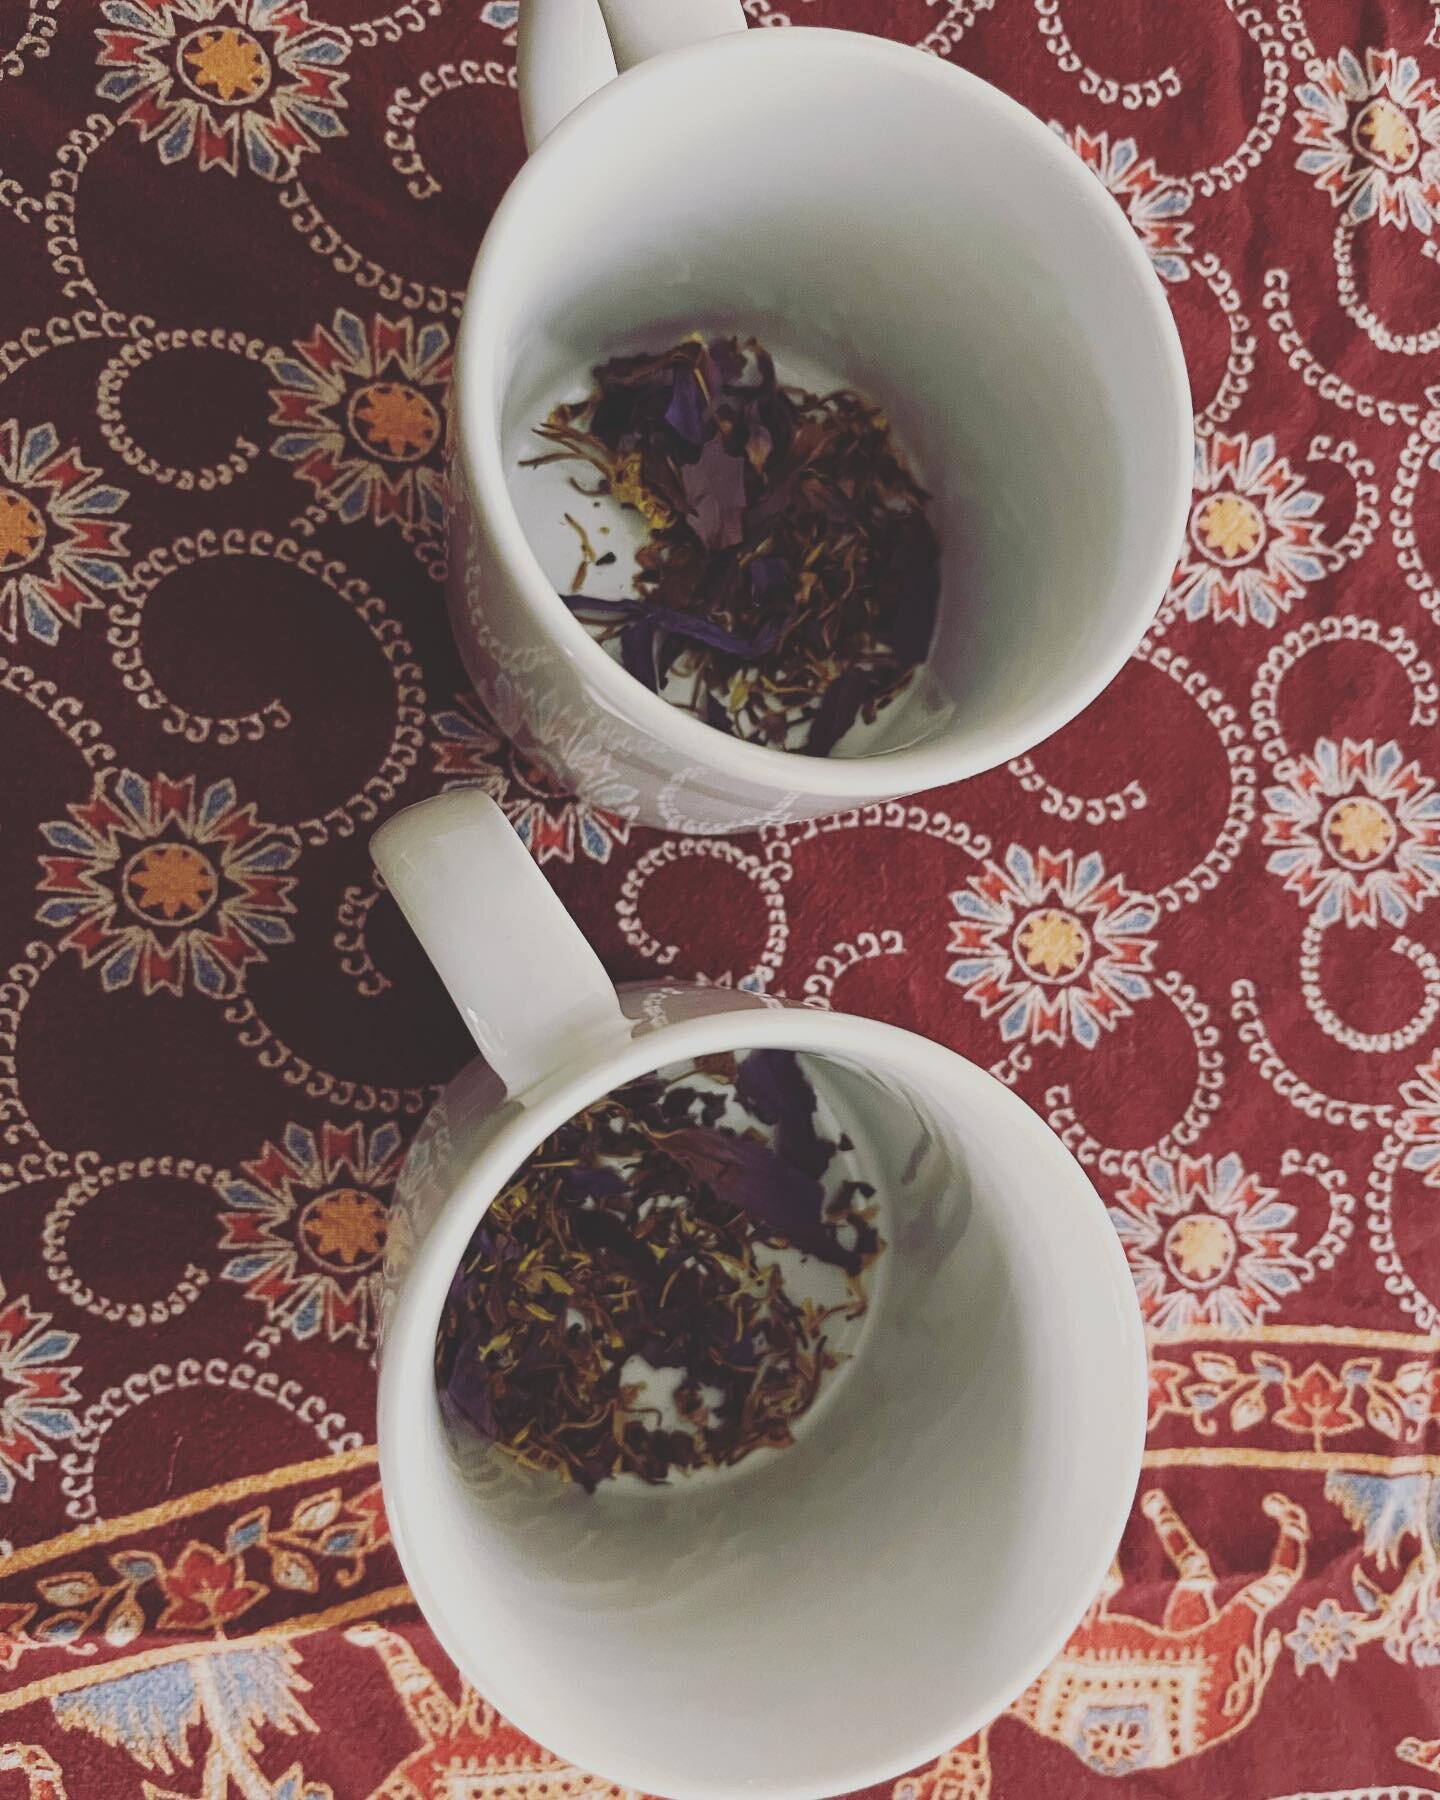 Sacred Medicine

Psychedelics don&rsquo;t always have to be heroic. Sometimes a subtle opening and shift can happen with a gentle and loving plant in the form of tea. 

#bluelotus #nymphaeacerulea #euphoric #heartopening #safeplace #integrativetherap